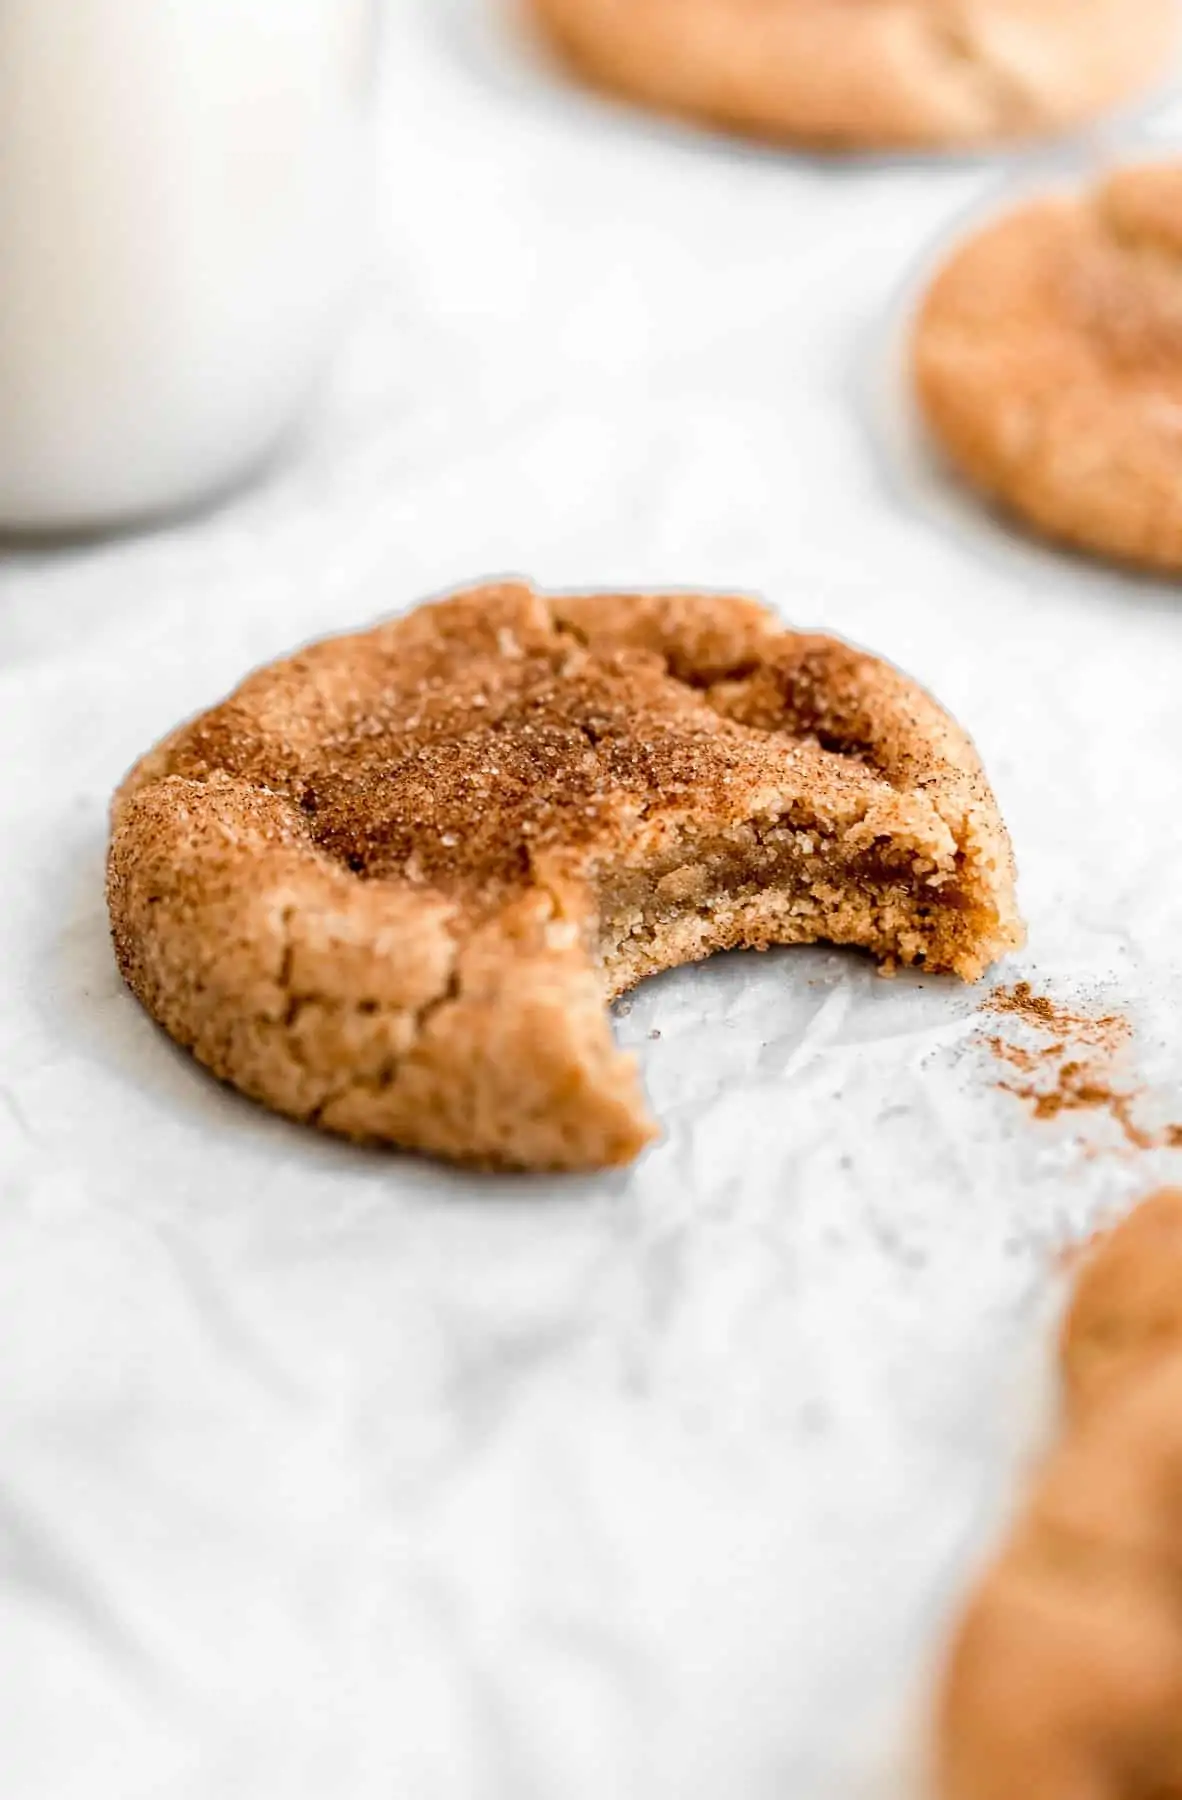 One vegan snickerdoodle with a bite taken out to show texture.